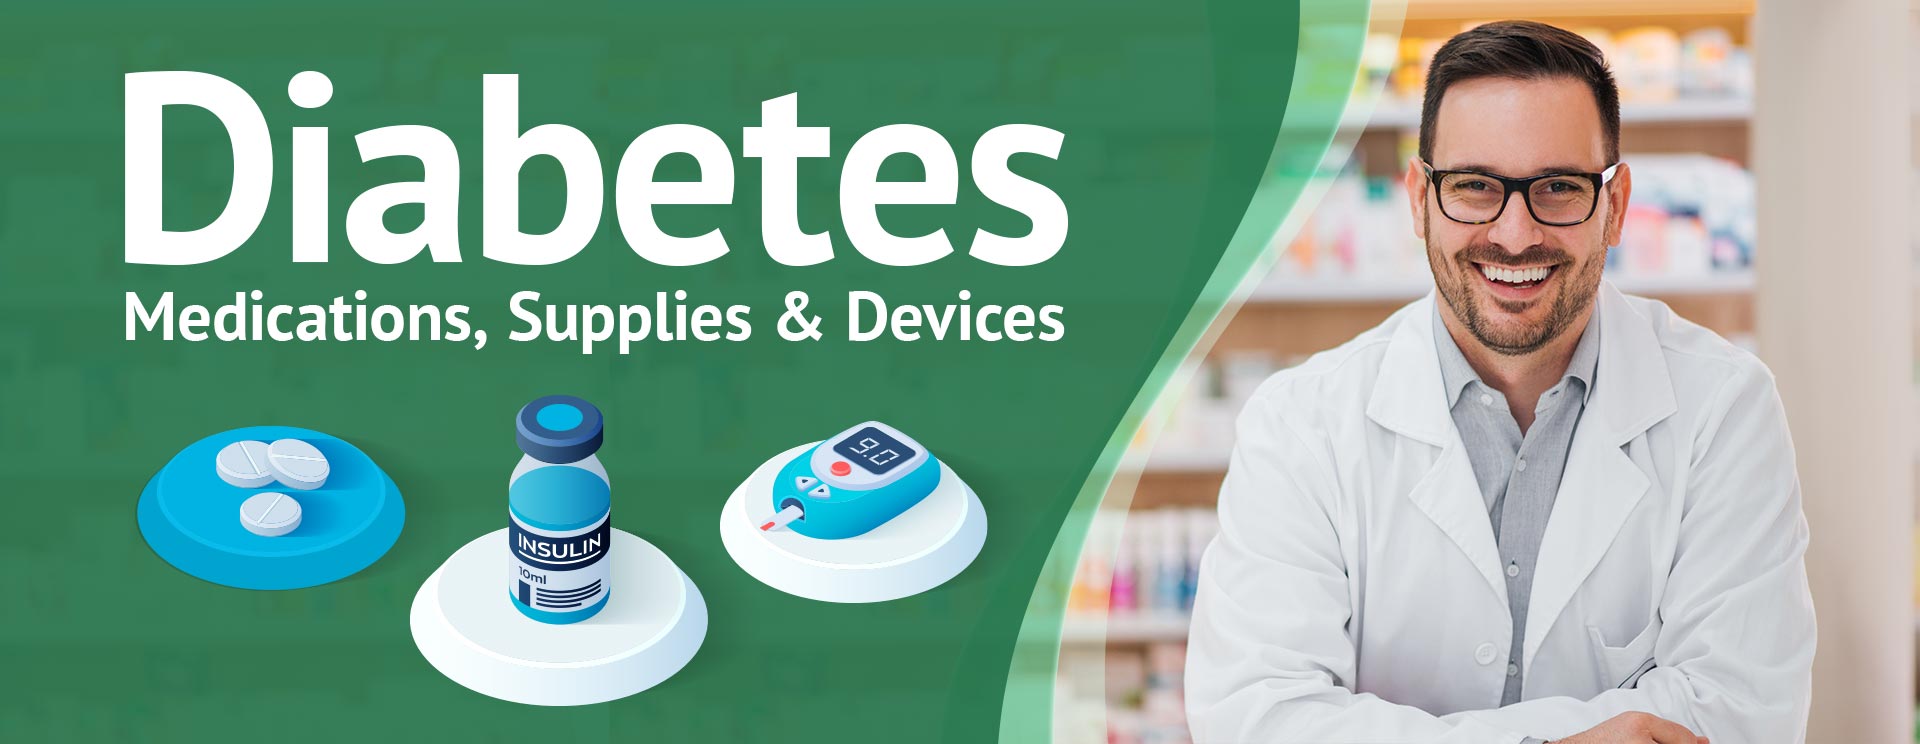 Diabetes Medications, Supplies & Devices